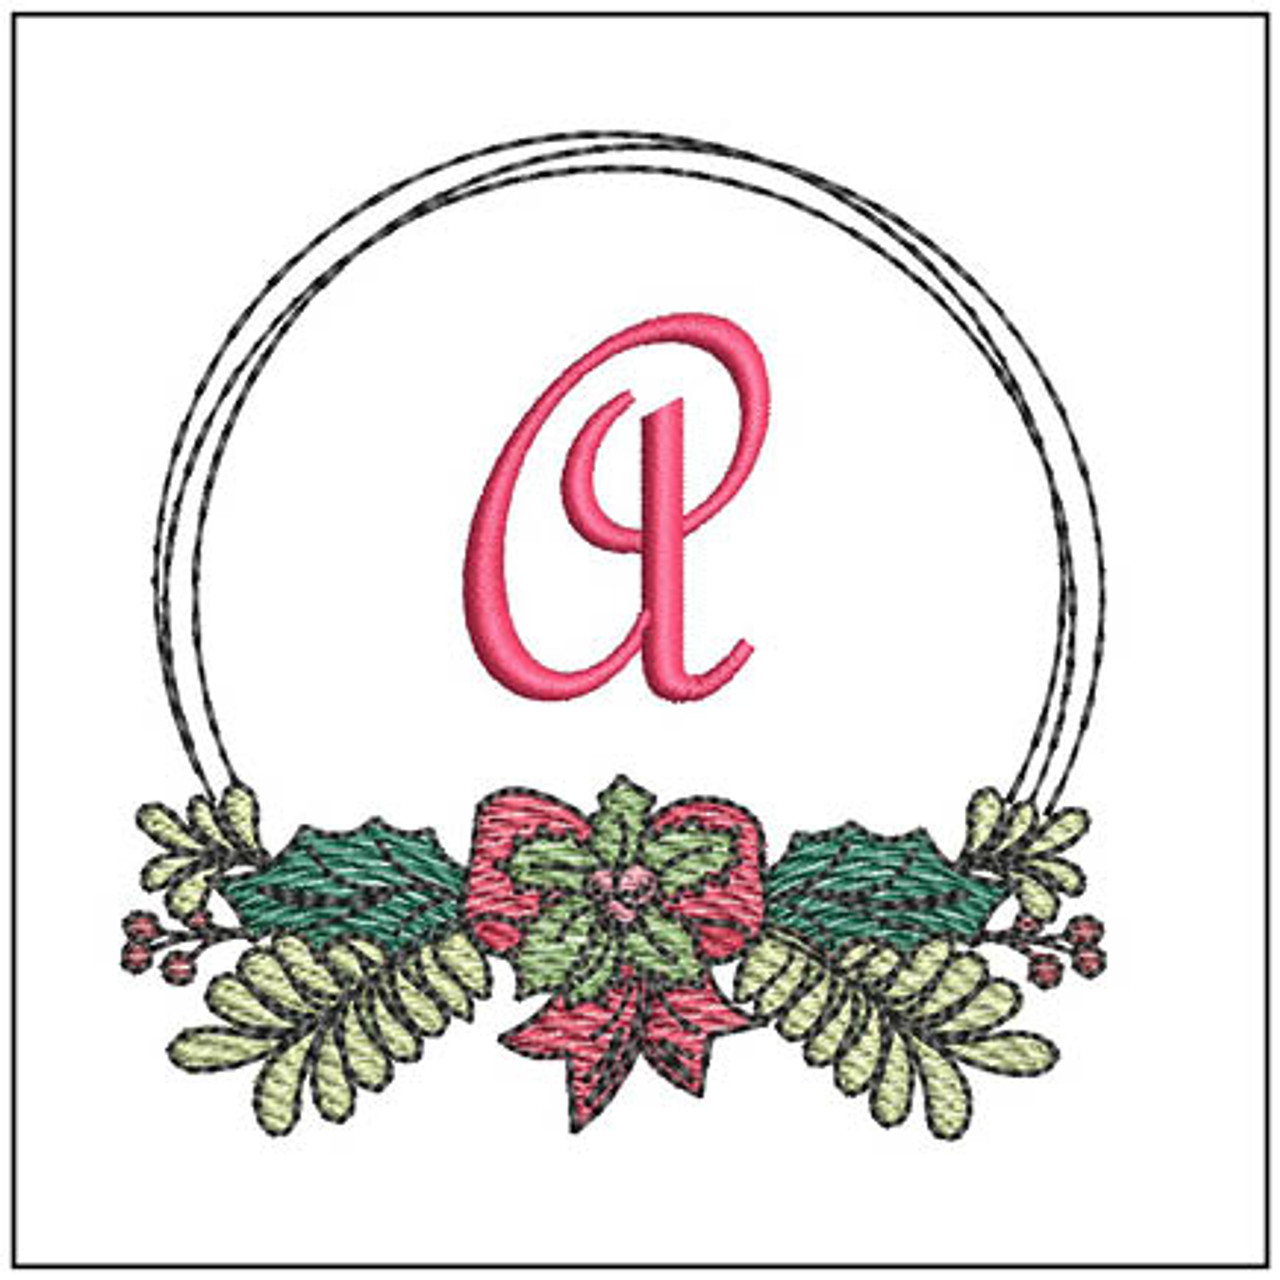 Cherry Coin Purse- Fits a 4x4 Hoop, Machine Embroidery Pattern, - Tattered  Stitch Embroideries